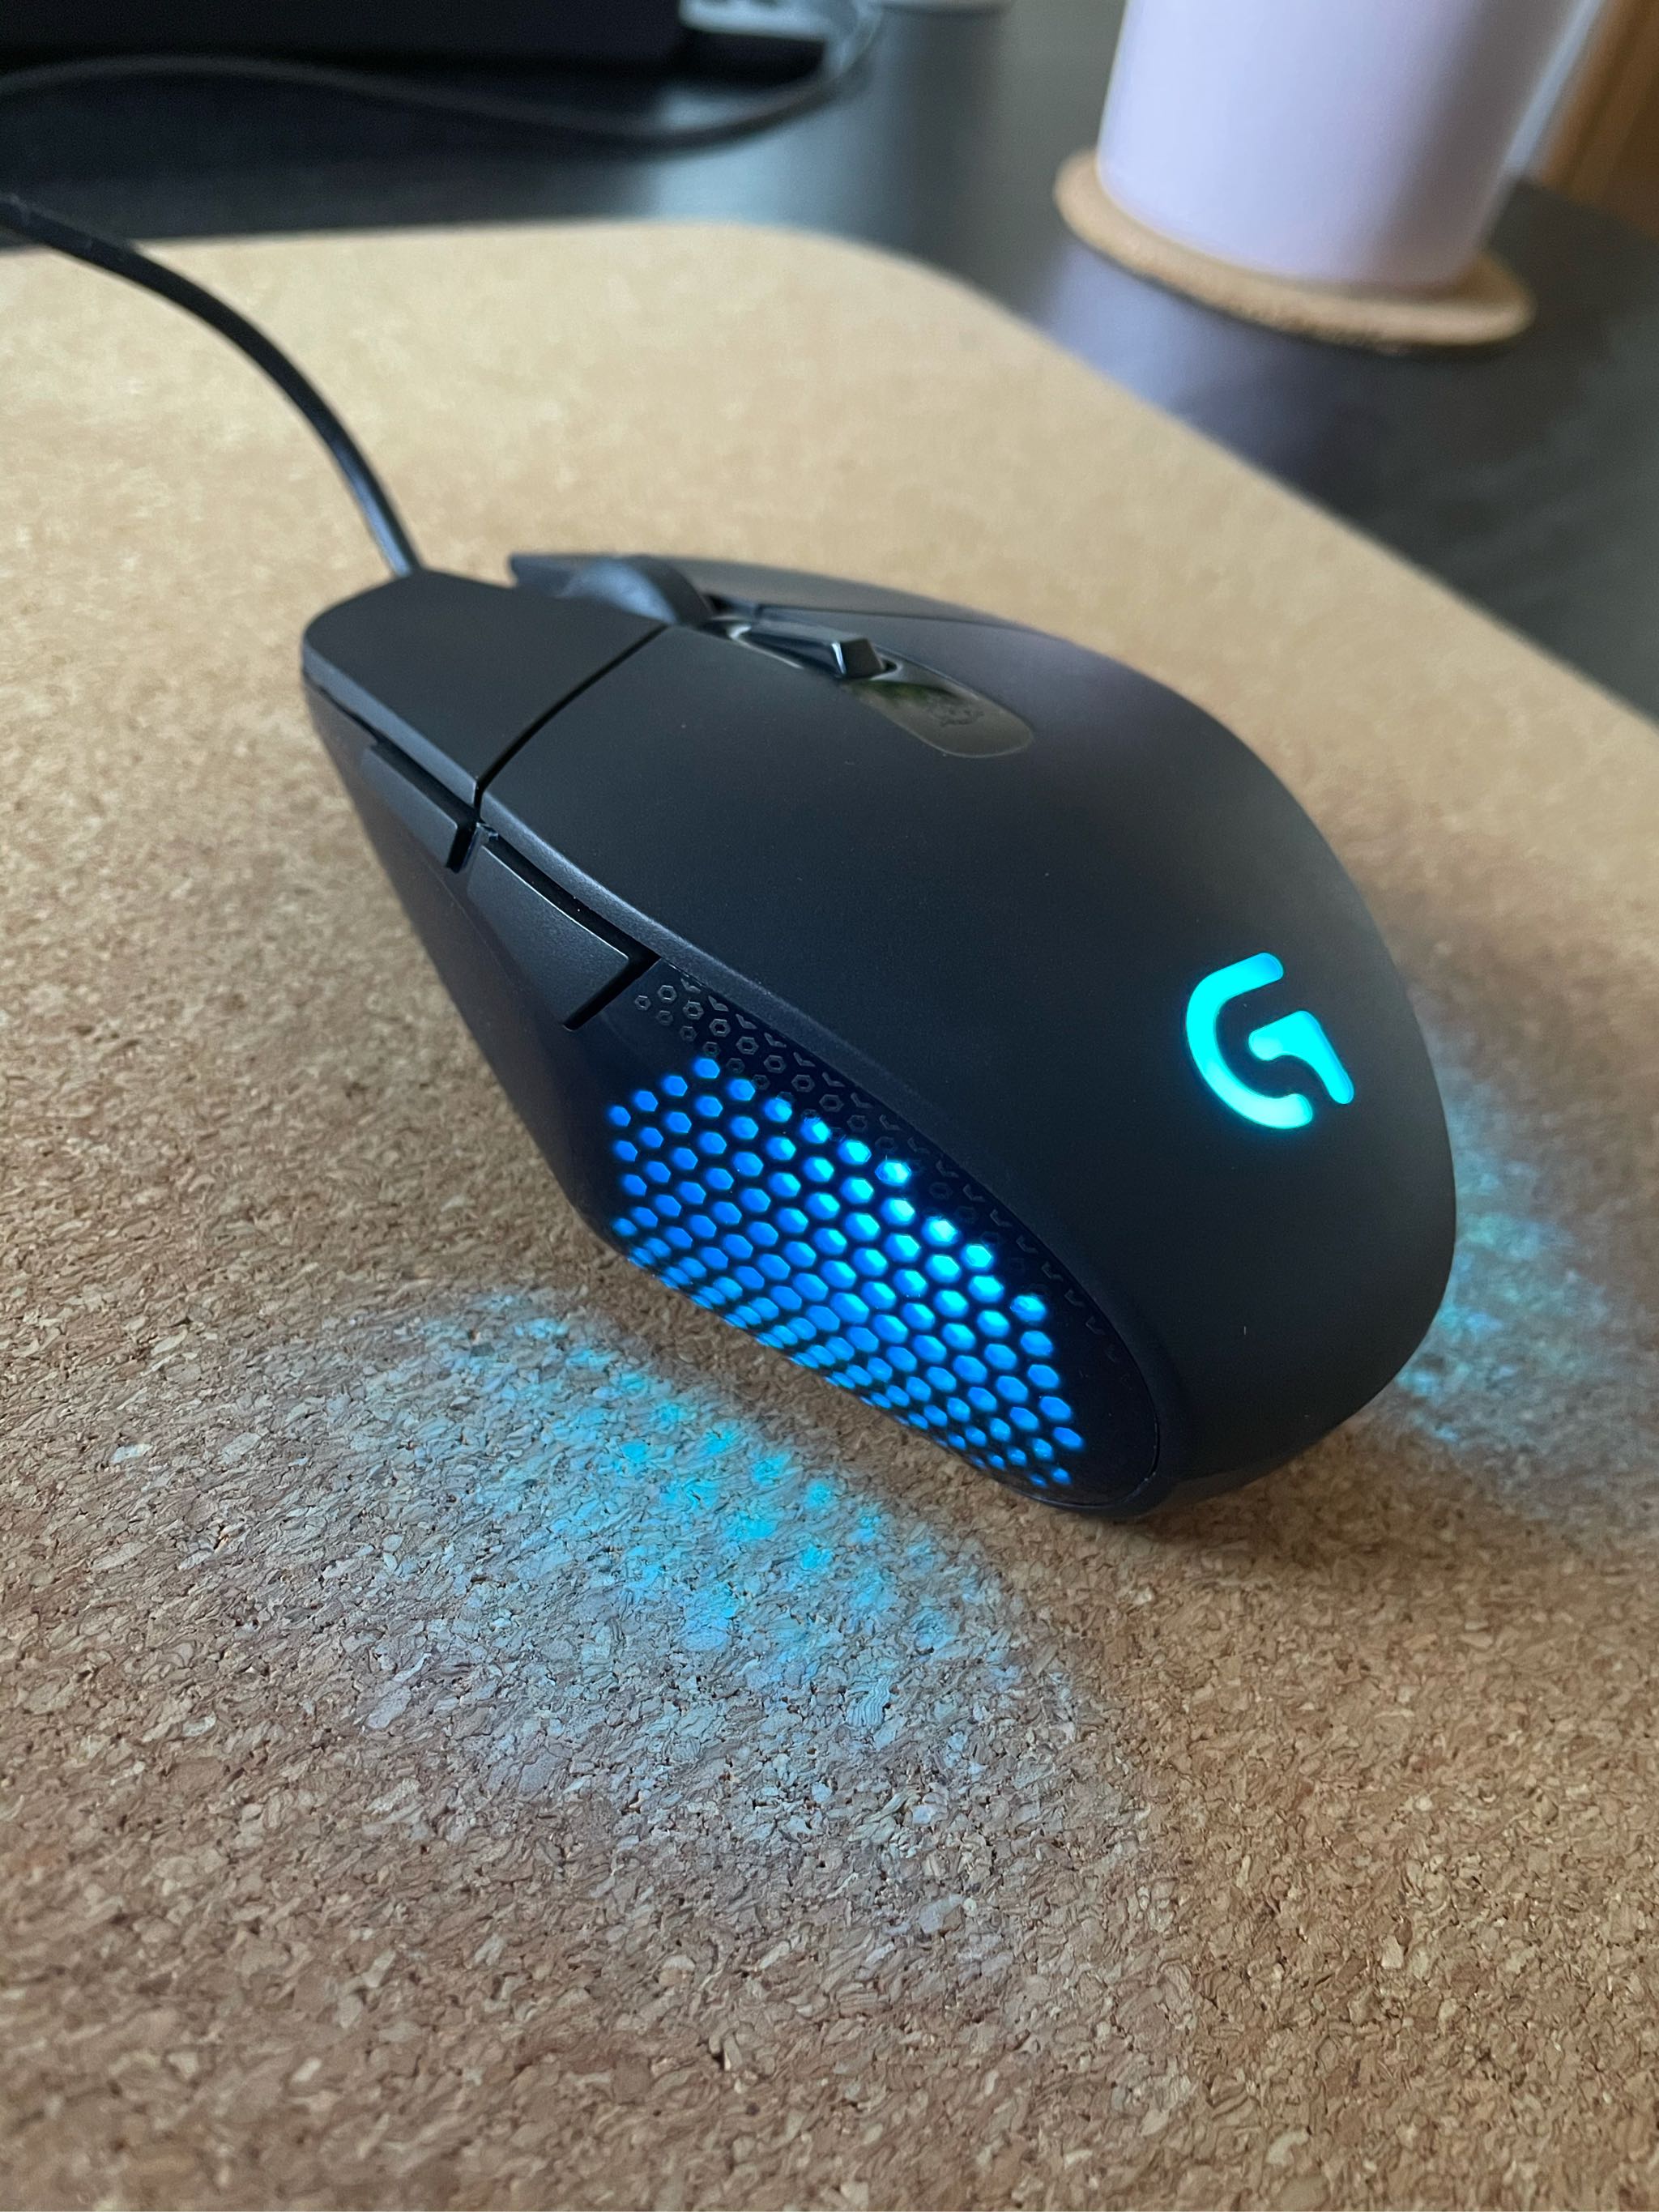 Logitech G302 Daedalus Prime MOBA Gaming Mouse Released